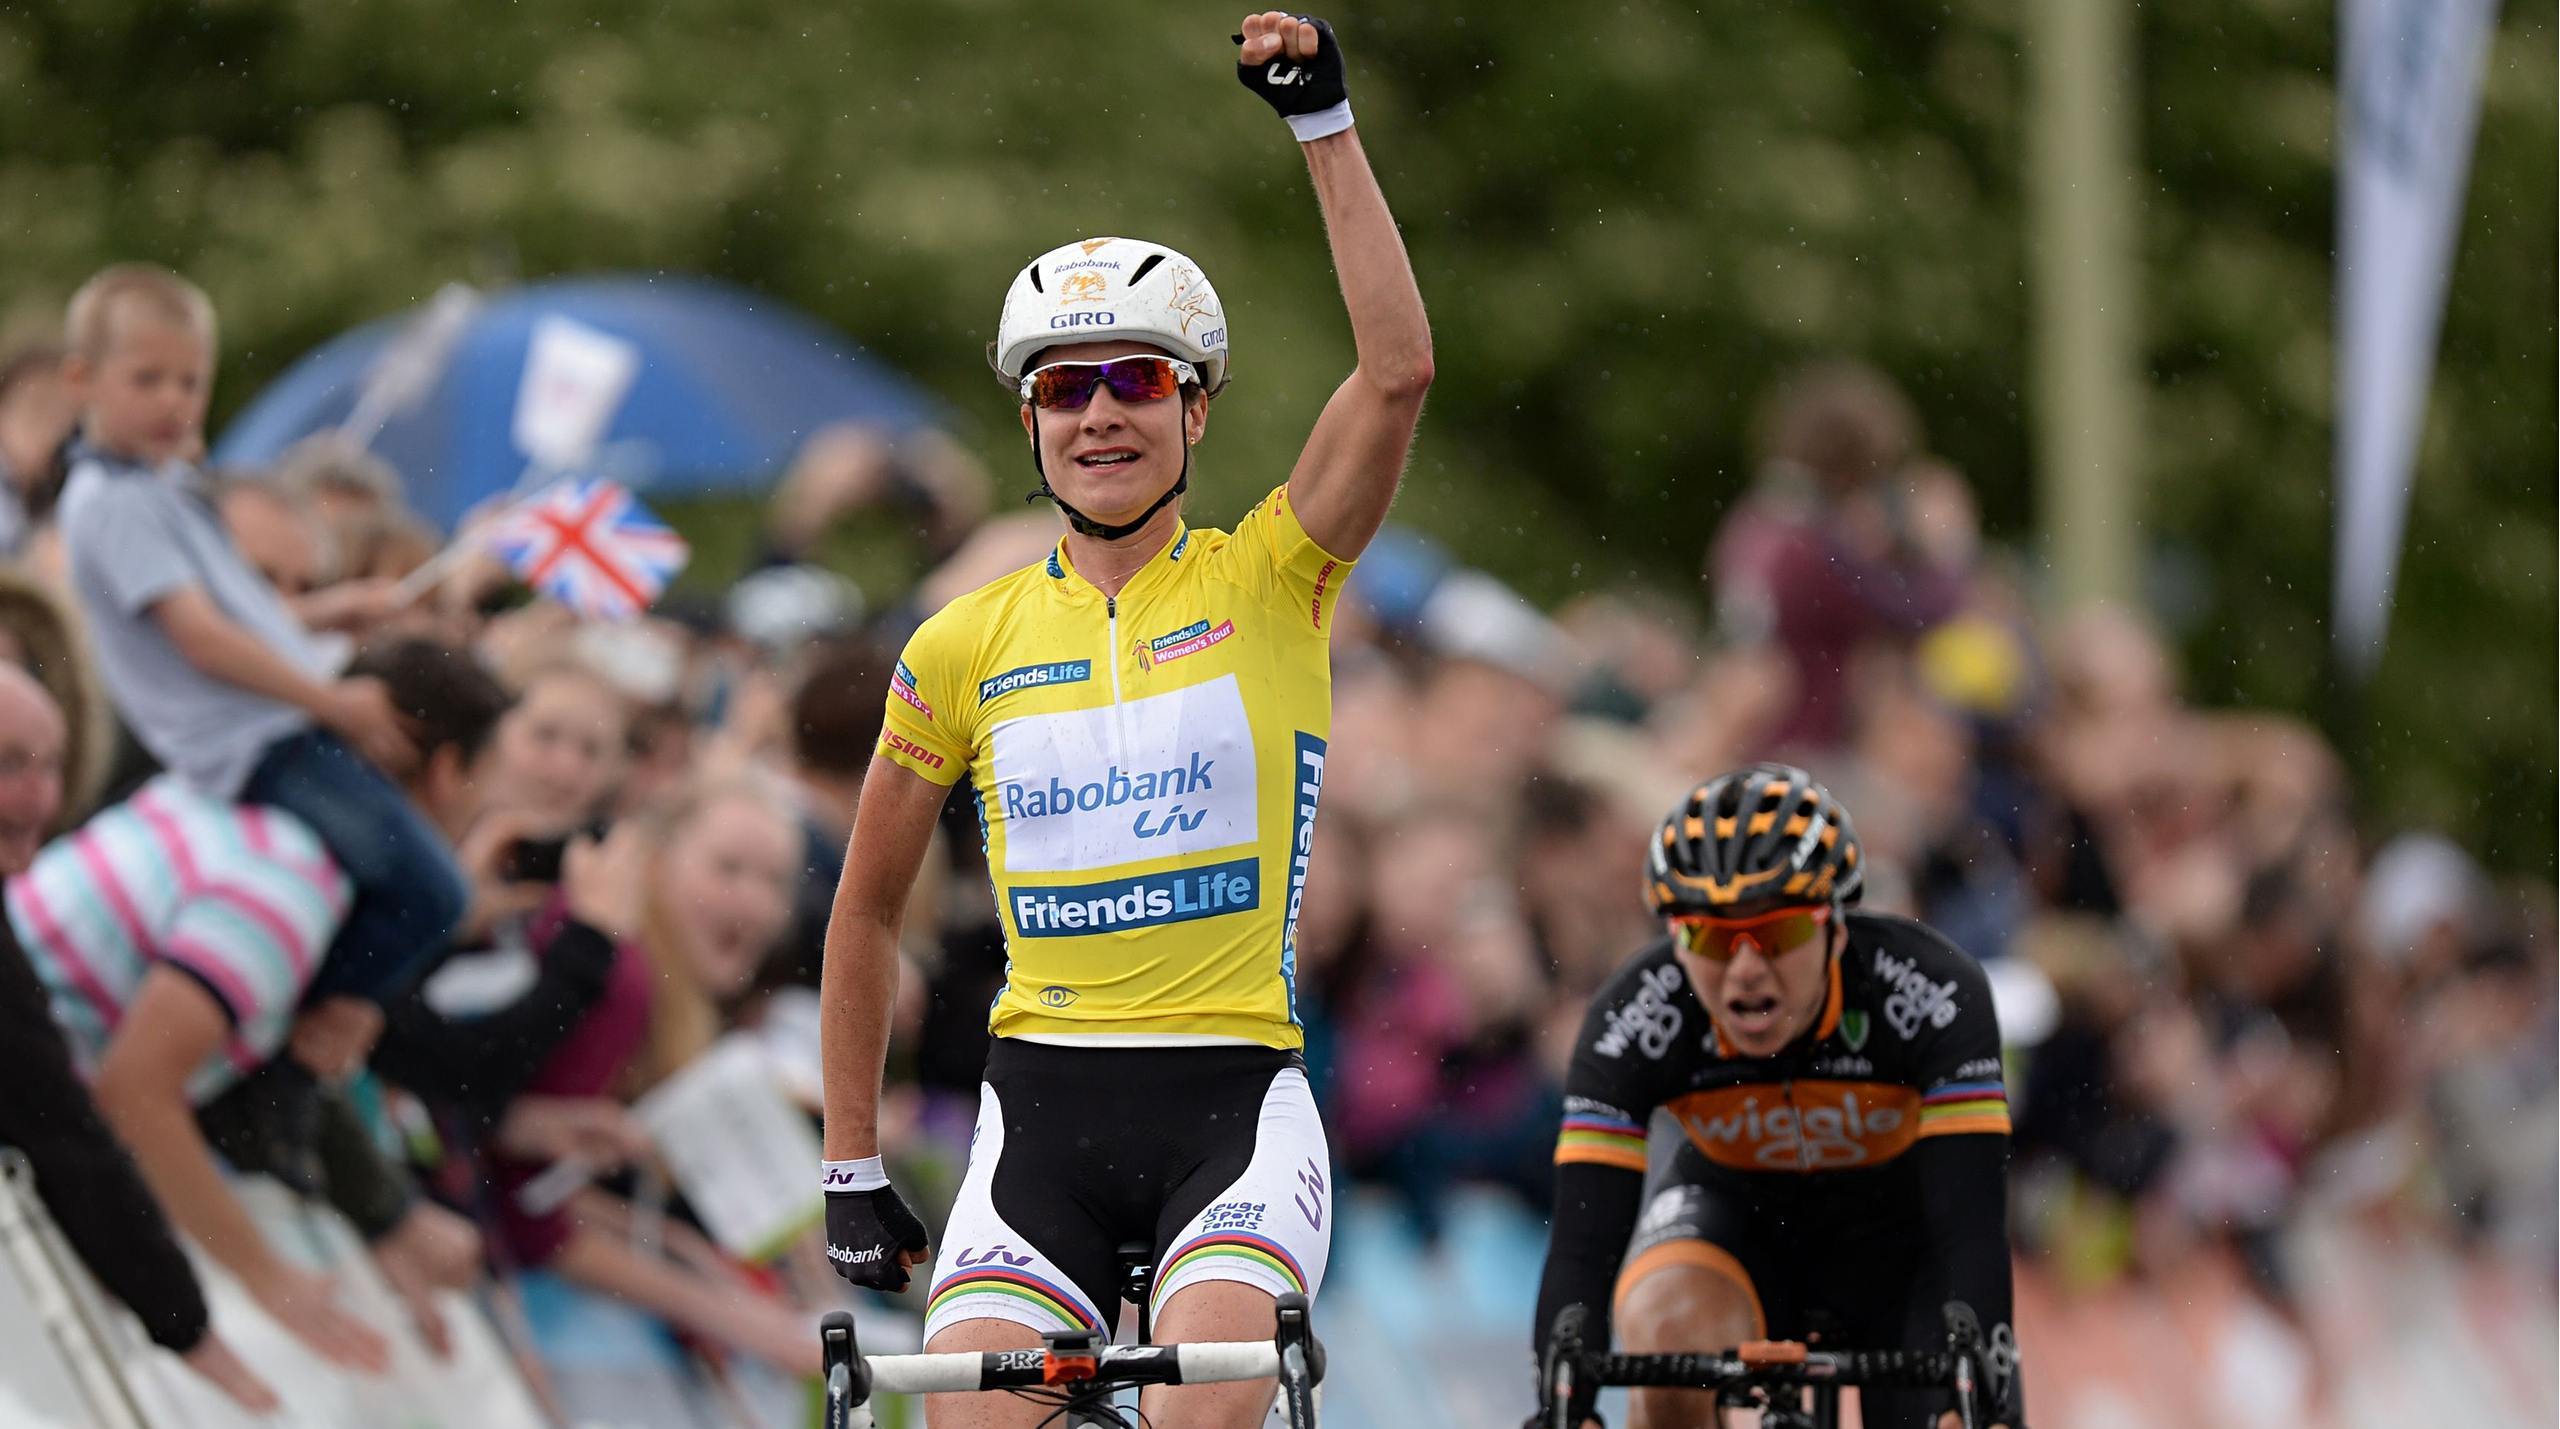 Marianne Vos crosses the finish line to win stage four of the Women's Tour in Welwyn Garden City.